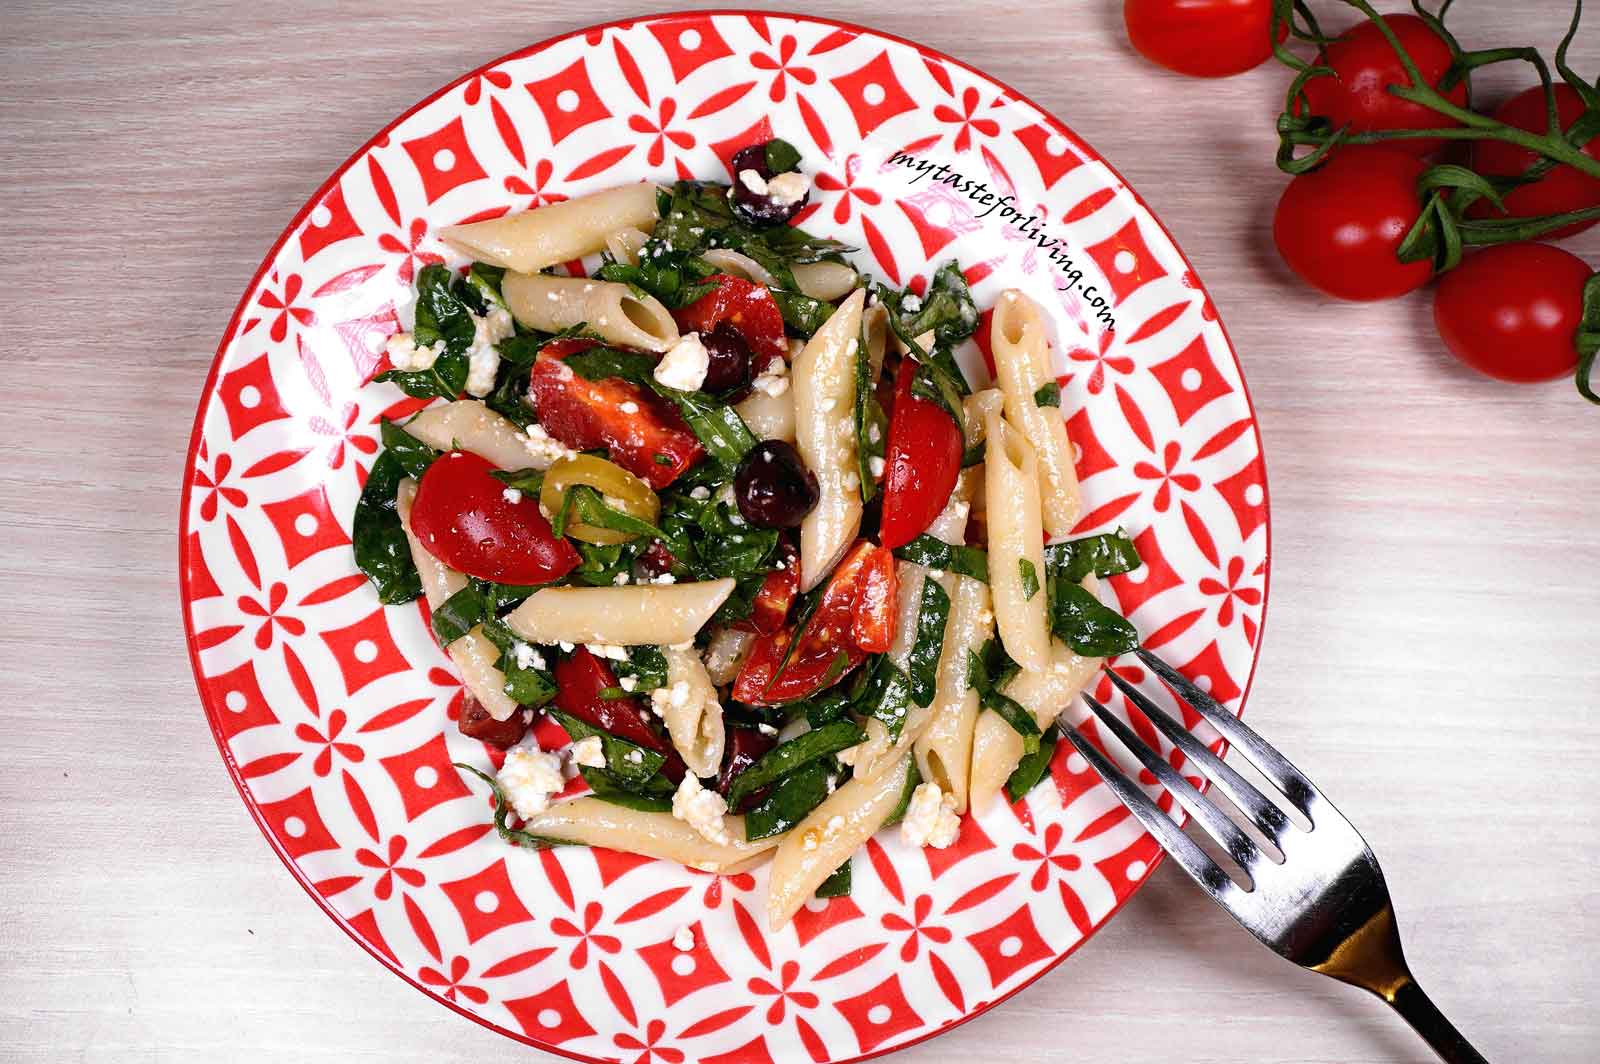 Easy, tasty and satisfying fresh salad of fresh spinach, combined with pasta, cherry tomatoes and olives, sprinkled with feta cheese, which can easily be used as a main dish.